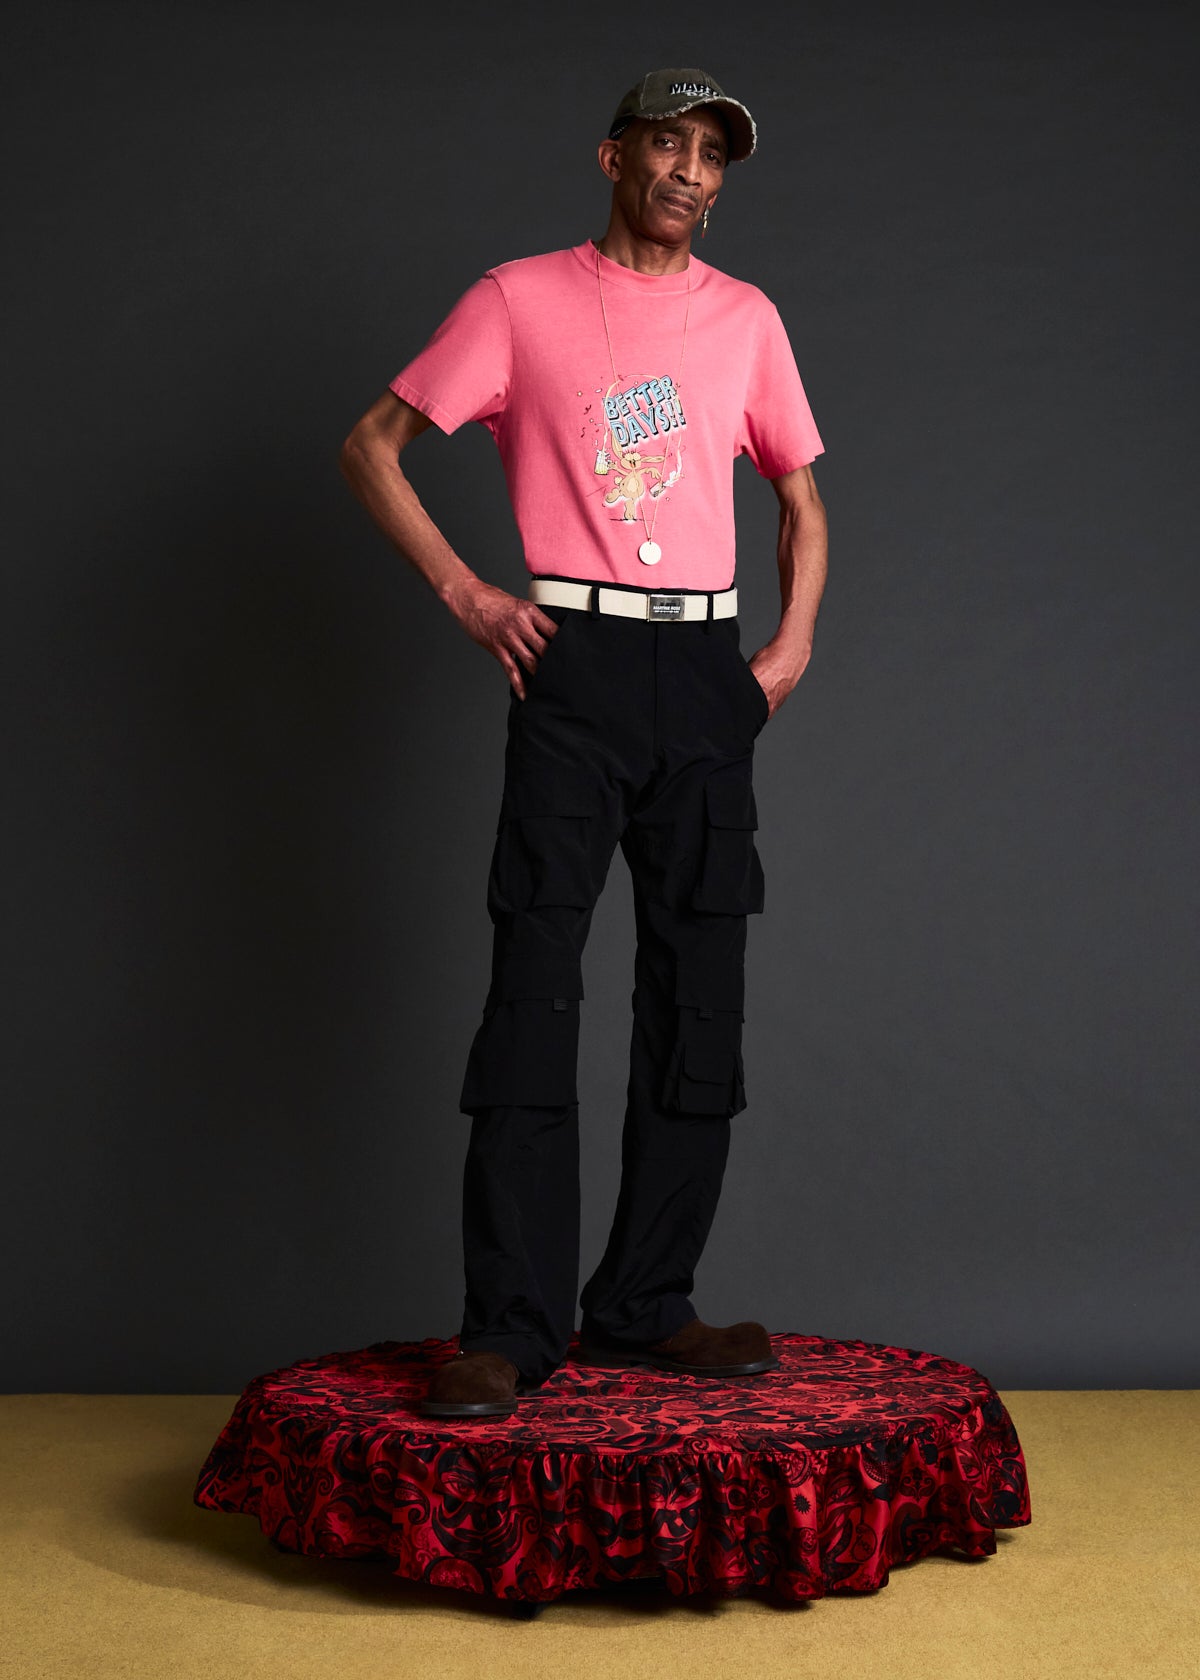 Buy MARTINE ROSE T-shirts online - 247 products